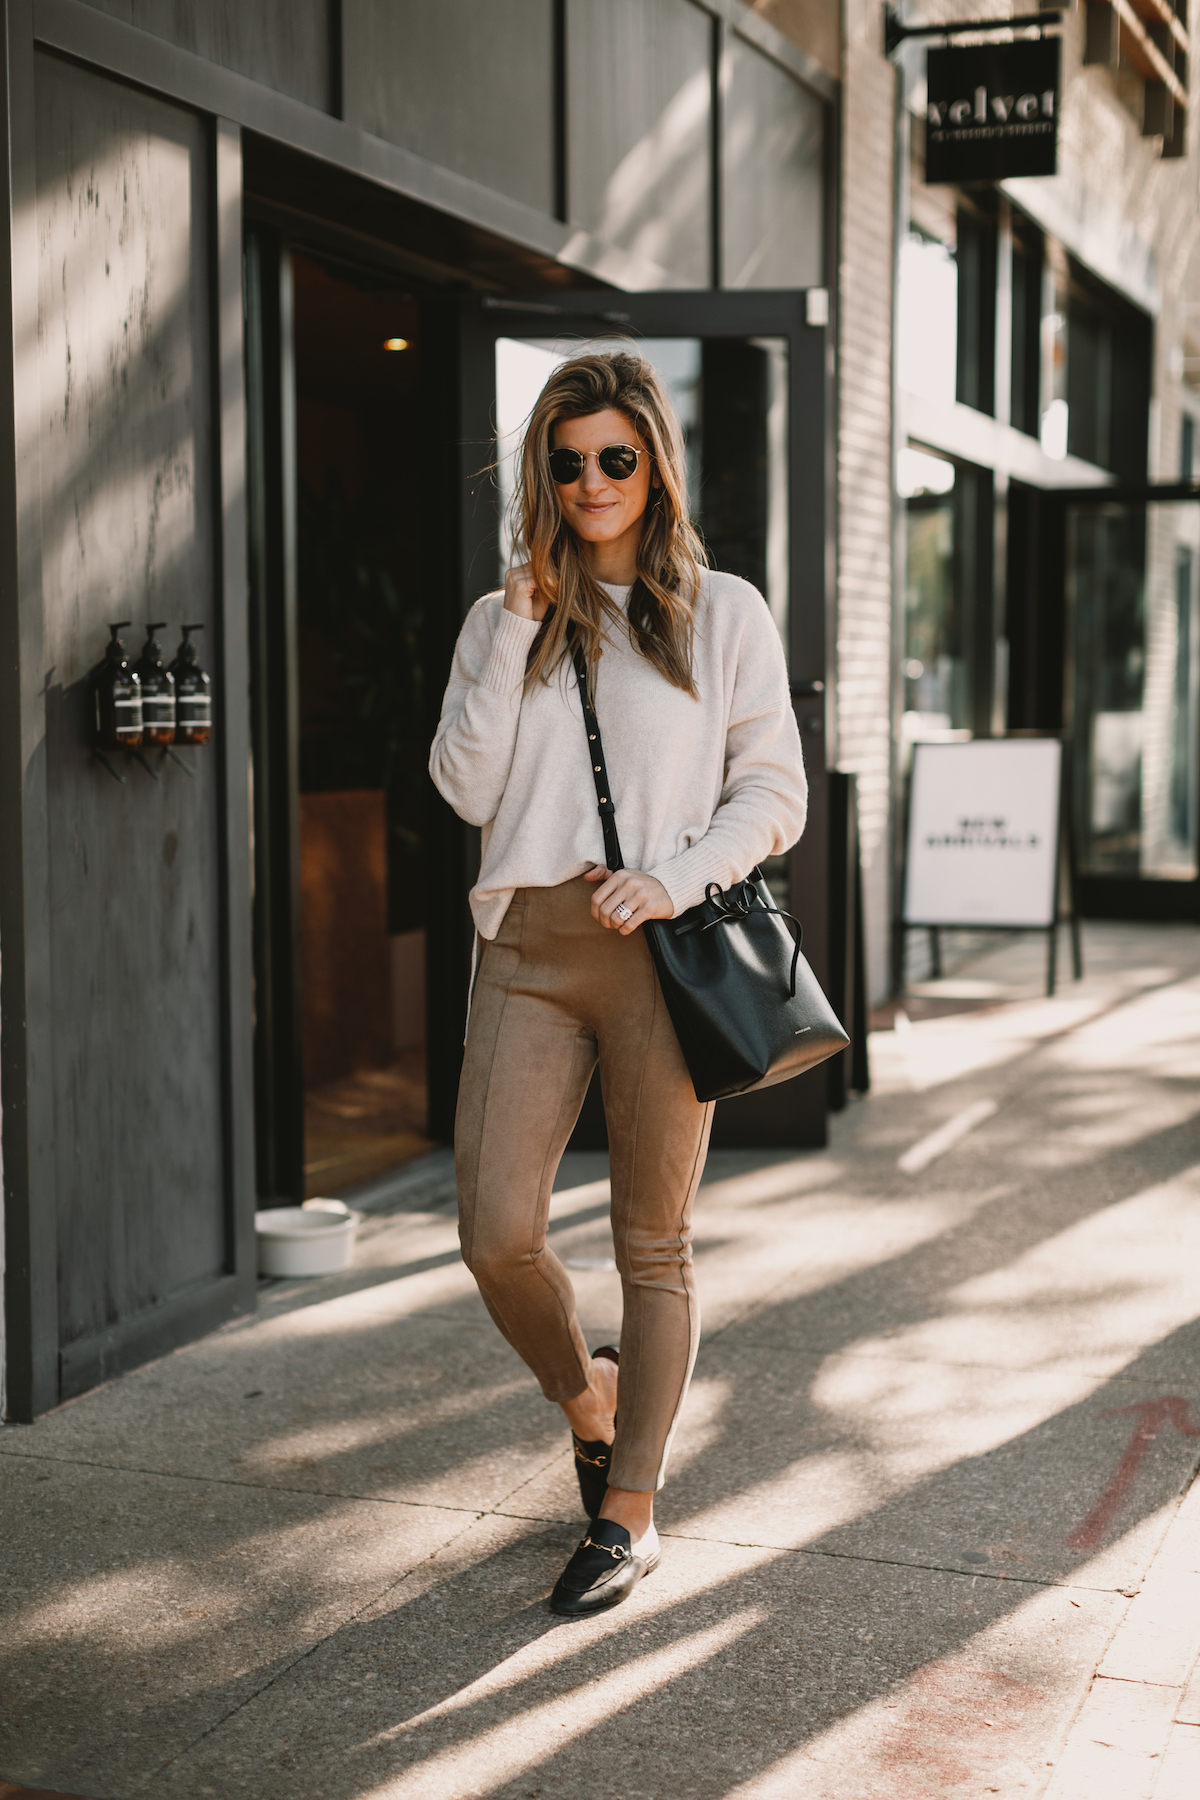 Brighton Butler wearing Spanx Suede Leggings with Sweater and Gucci Slides